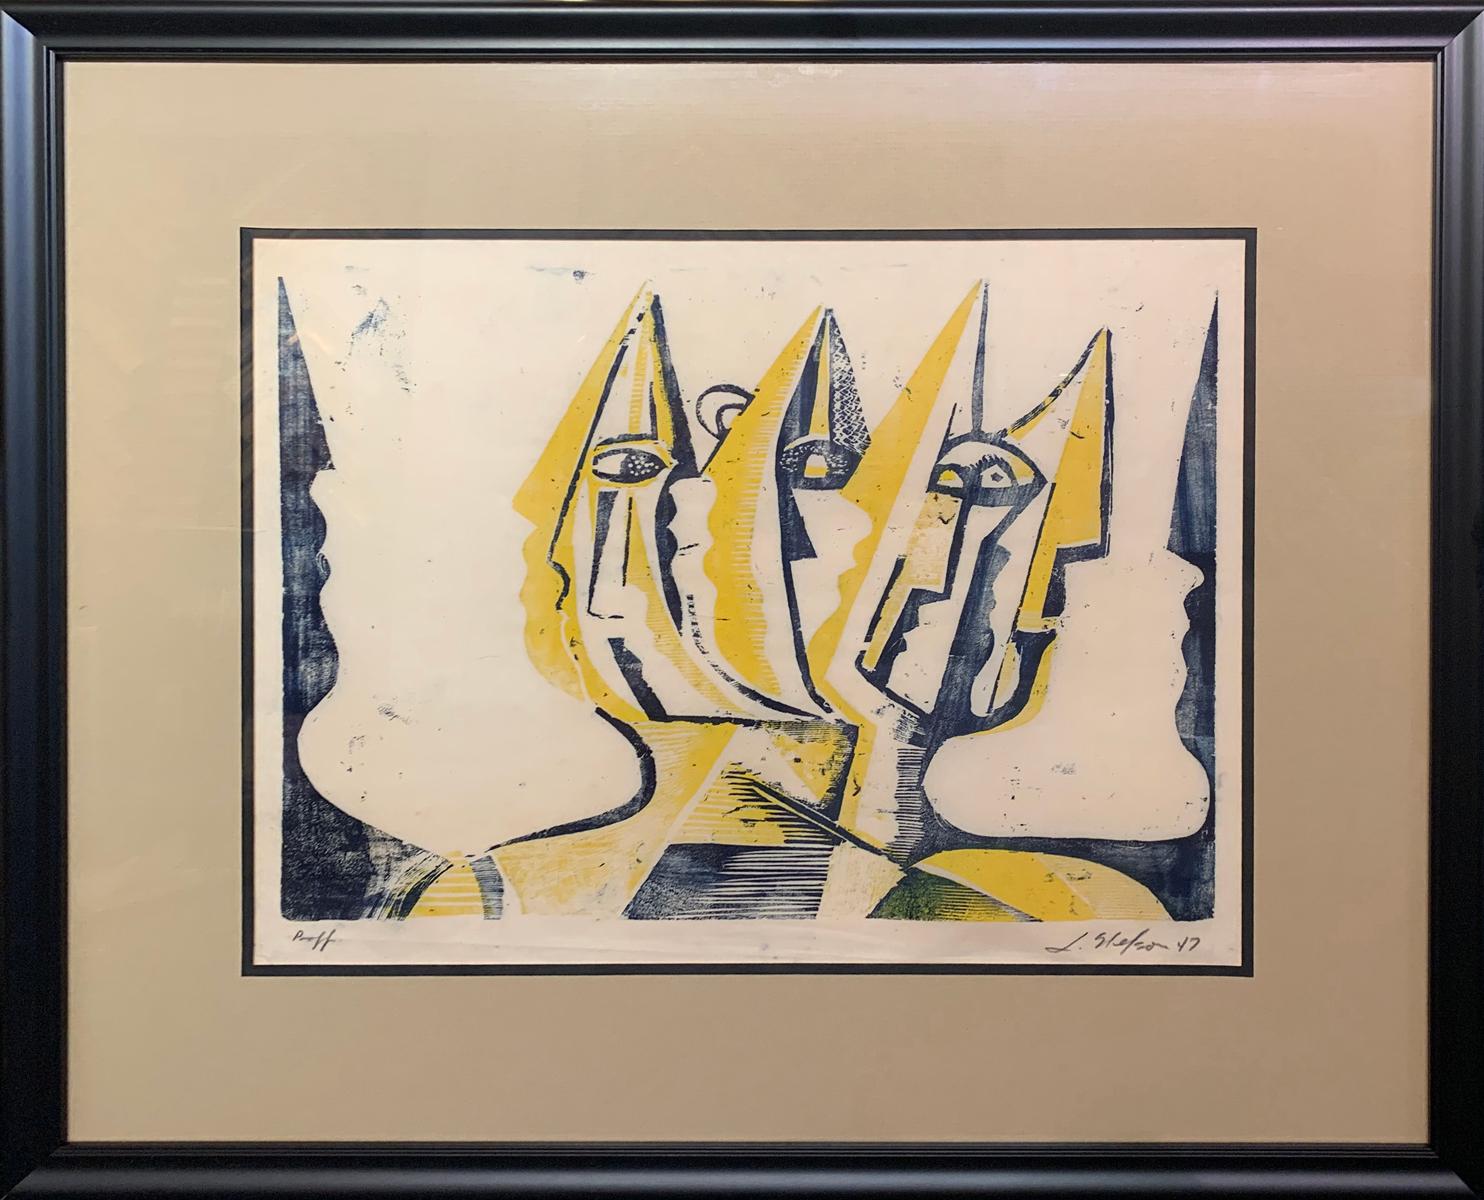 Three Figures, Abstract Figurative Art, Woodblock Print in Yellow, Signed, 1947